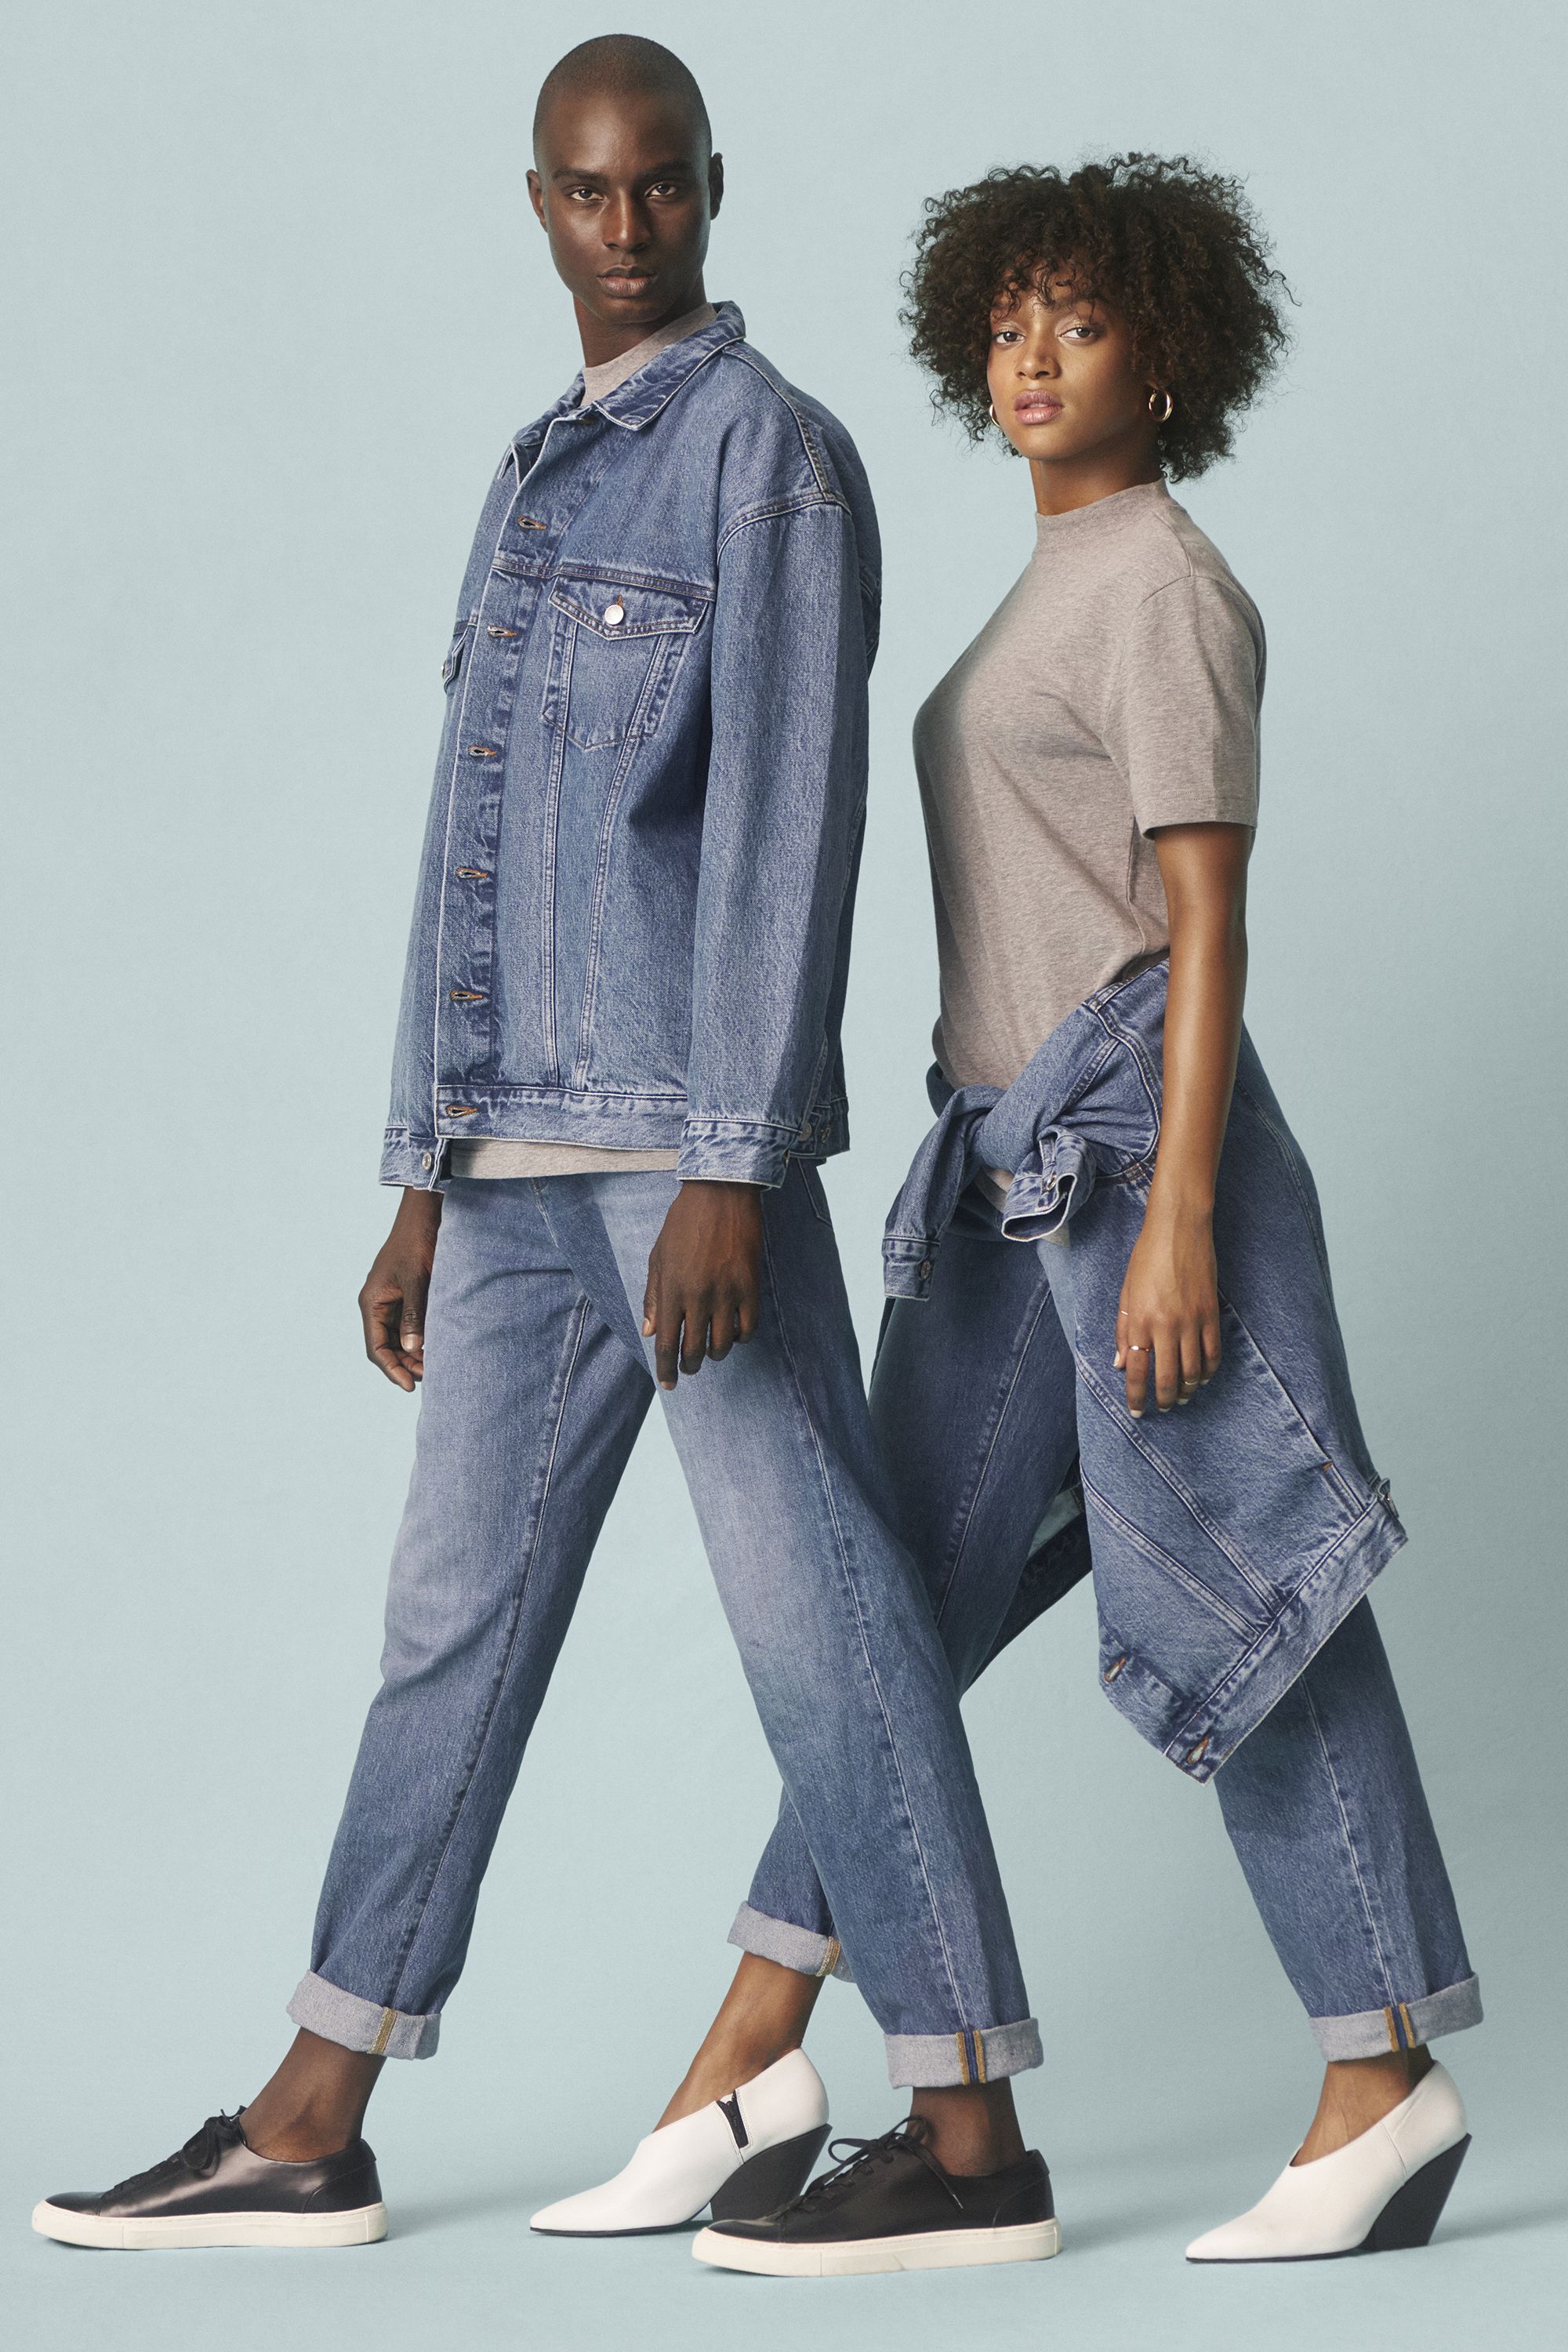 H&M Is Launching a Unisex Collection - H&M Denim United Line